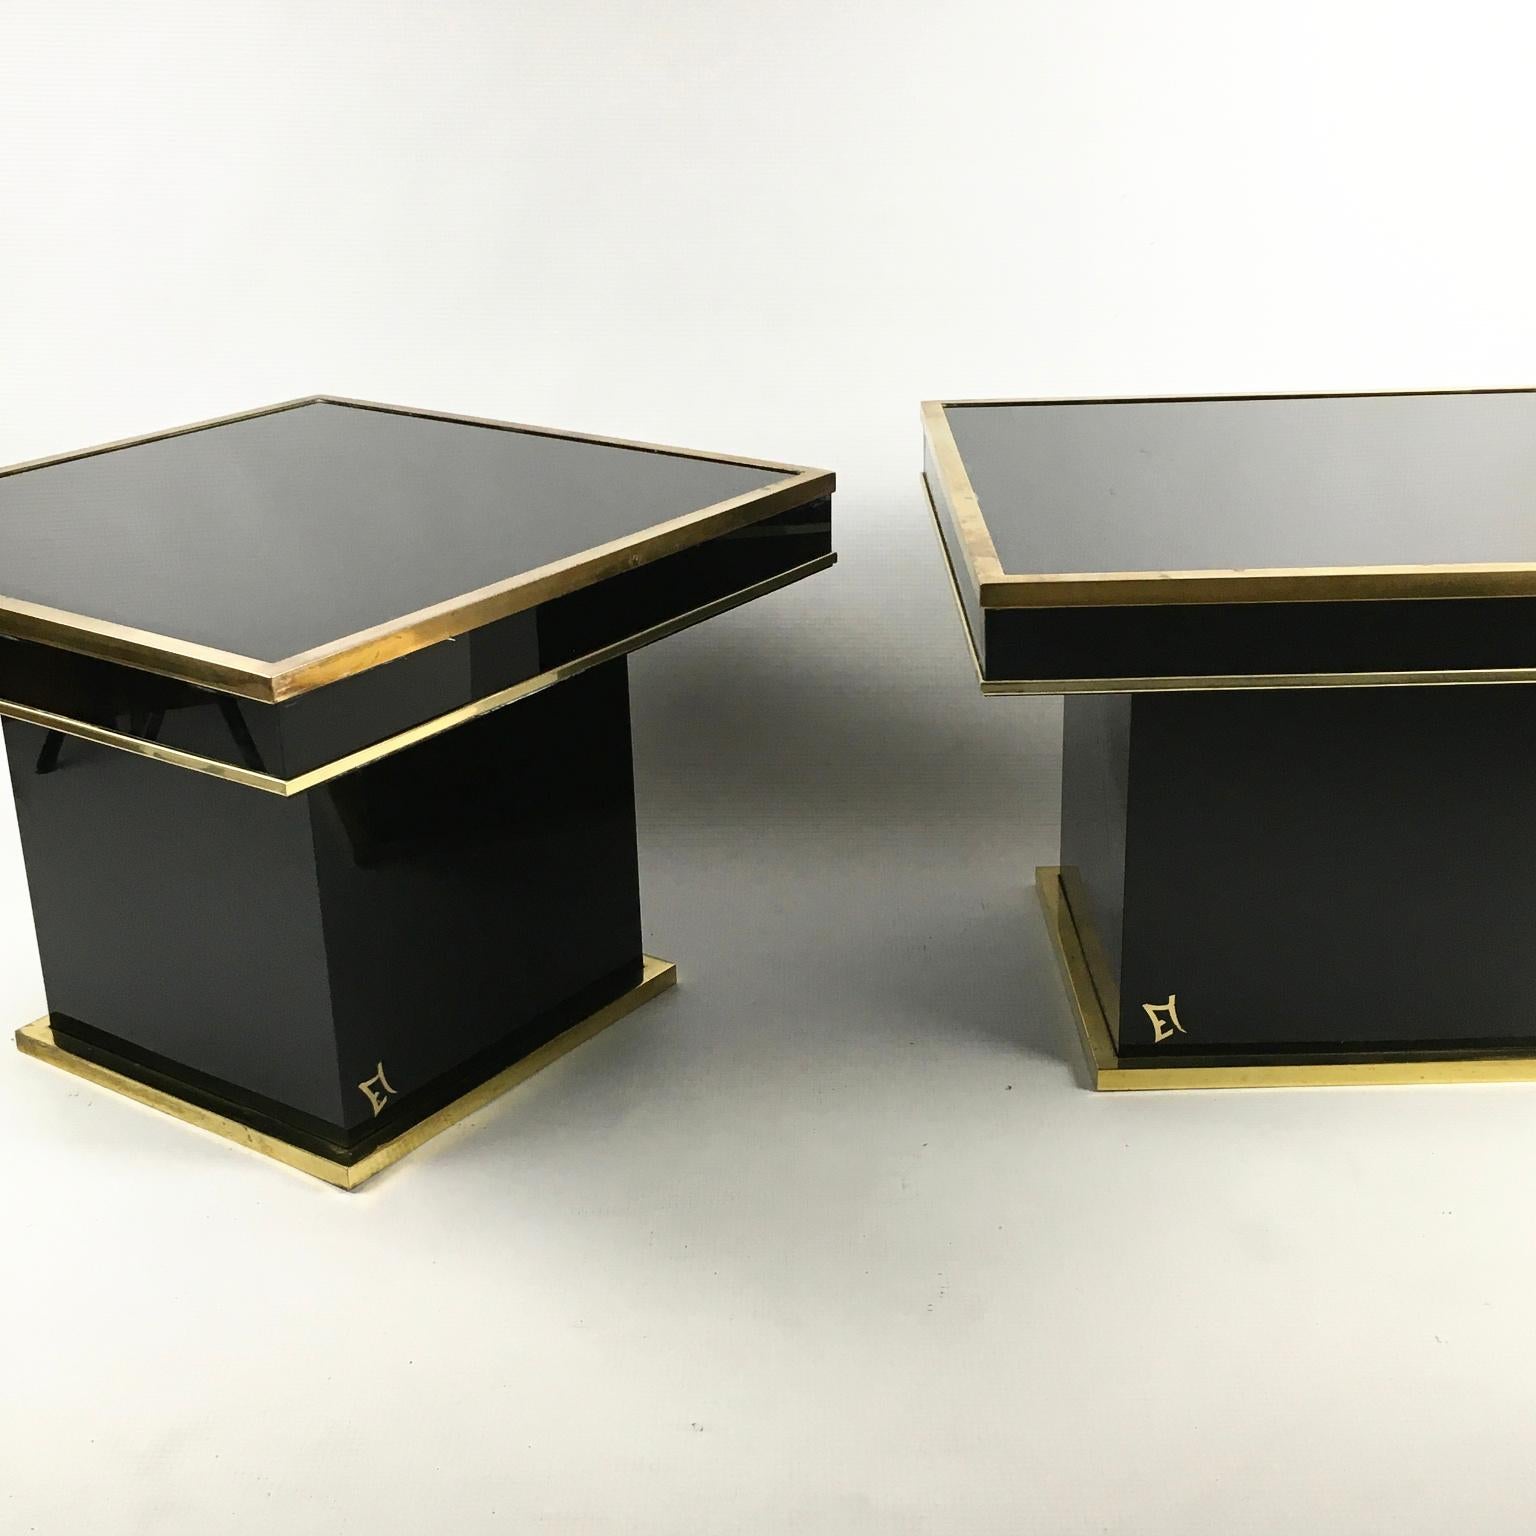 1970s Eric Maville pair of side tables with black glass top and brass frame for Maison Roméo
Possibly in association with the designer Jean Claude Mahey.
All are stamped with an EM brass monogram.


 